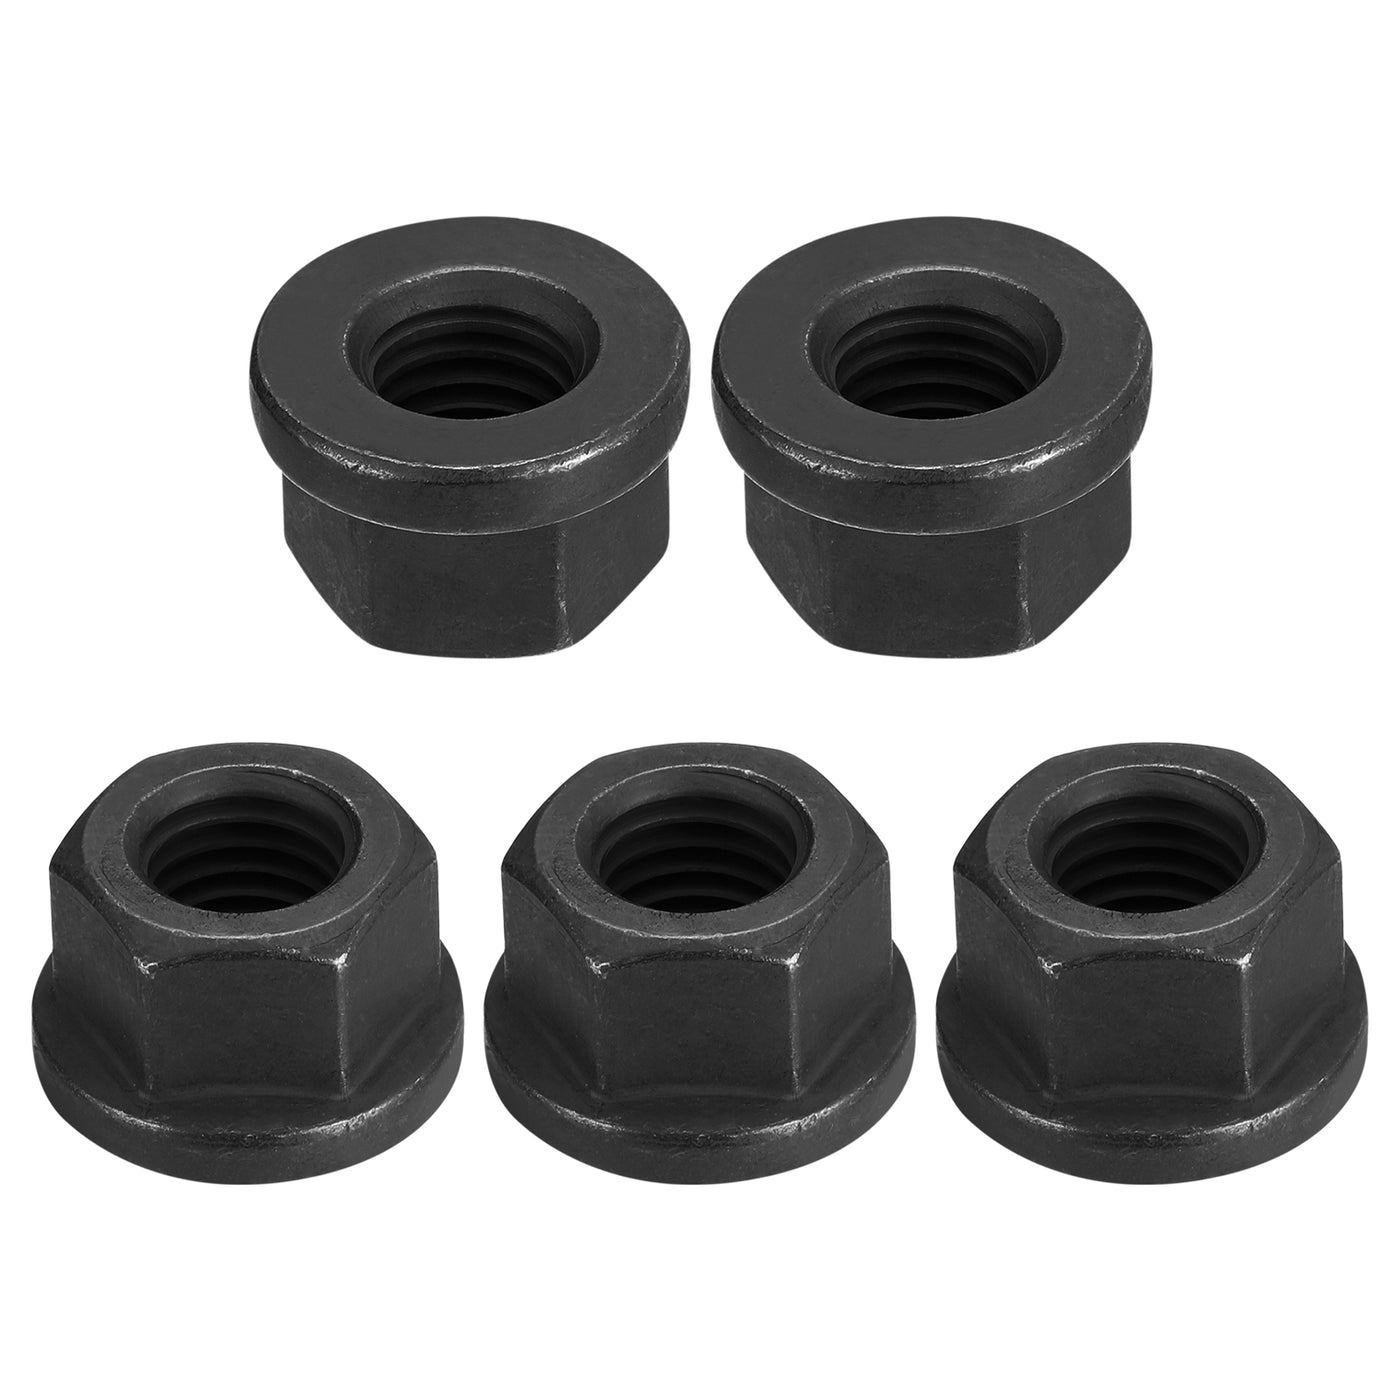 uxcell Uxcell M14 Flange Hex Lock Nuts, 5pcs Grade 12.9 Carbon Steel Hex Flange Nuts